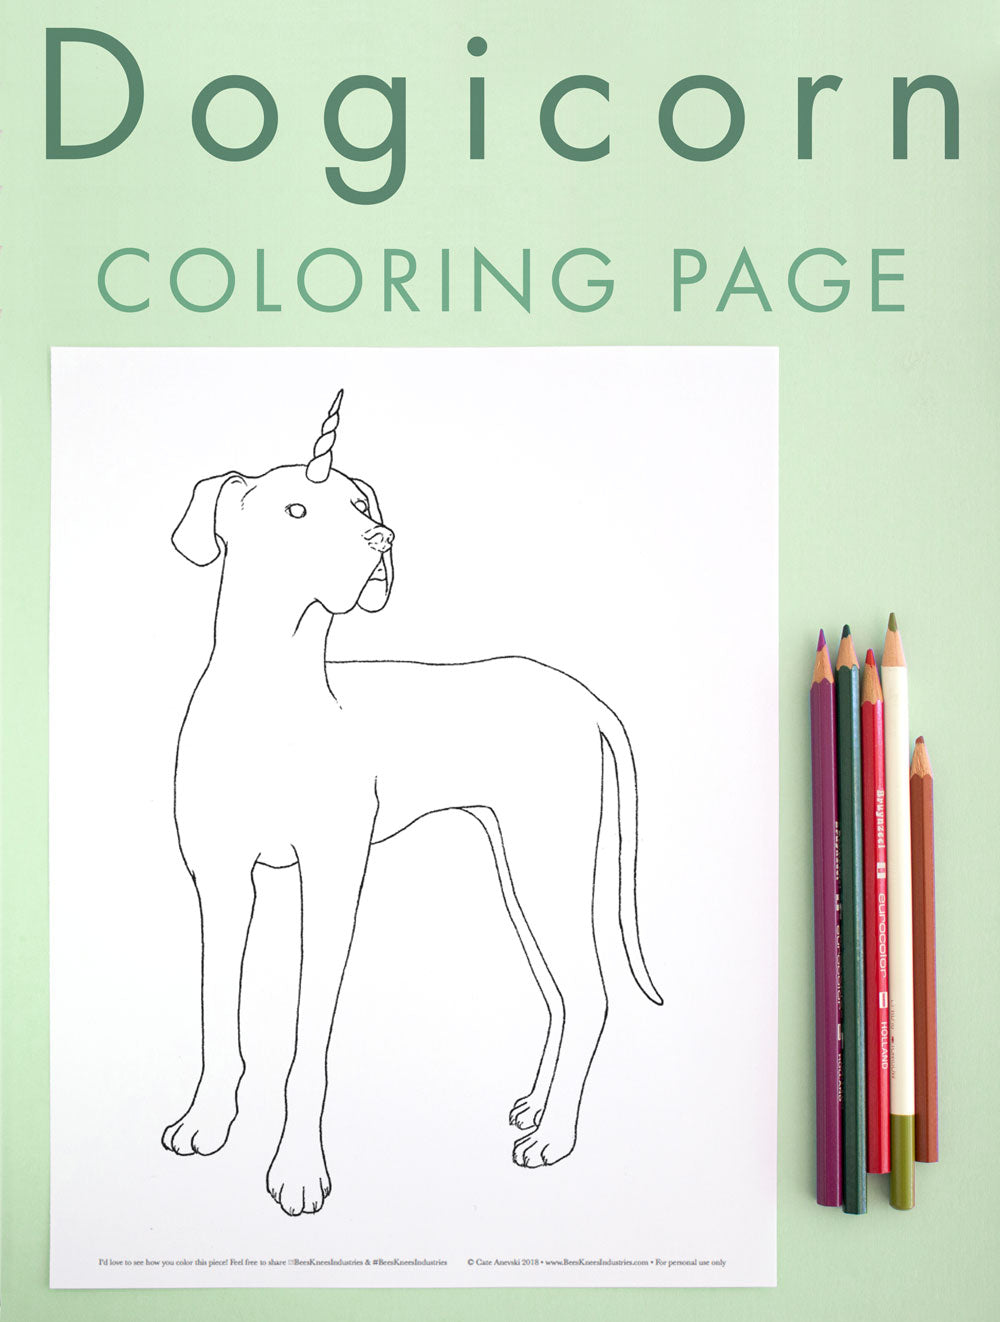 Dogicorn Coloring Page